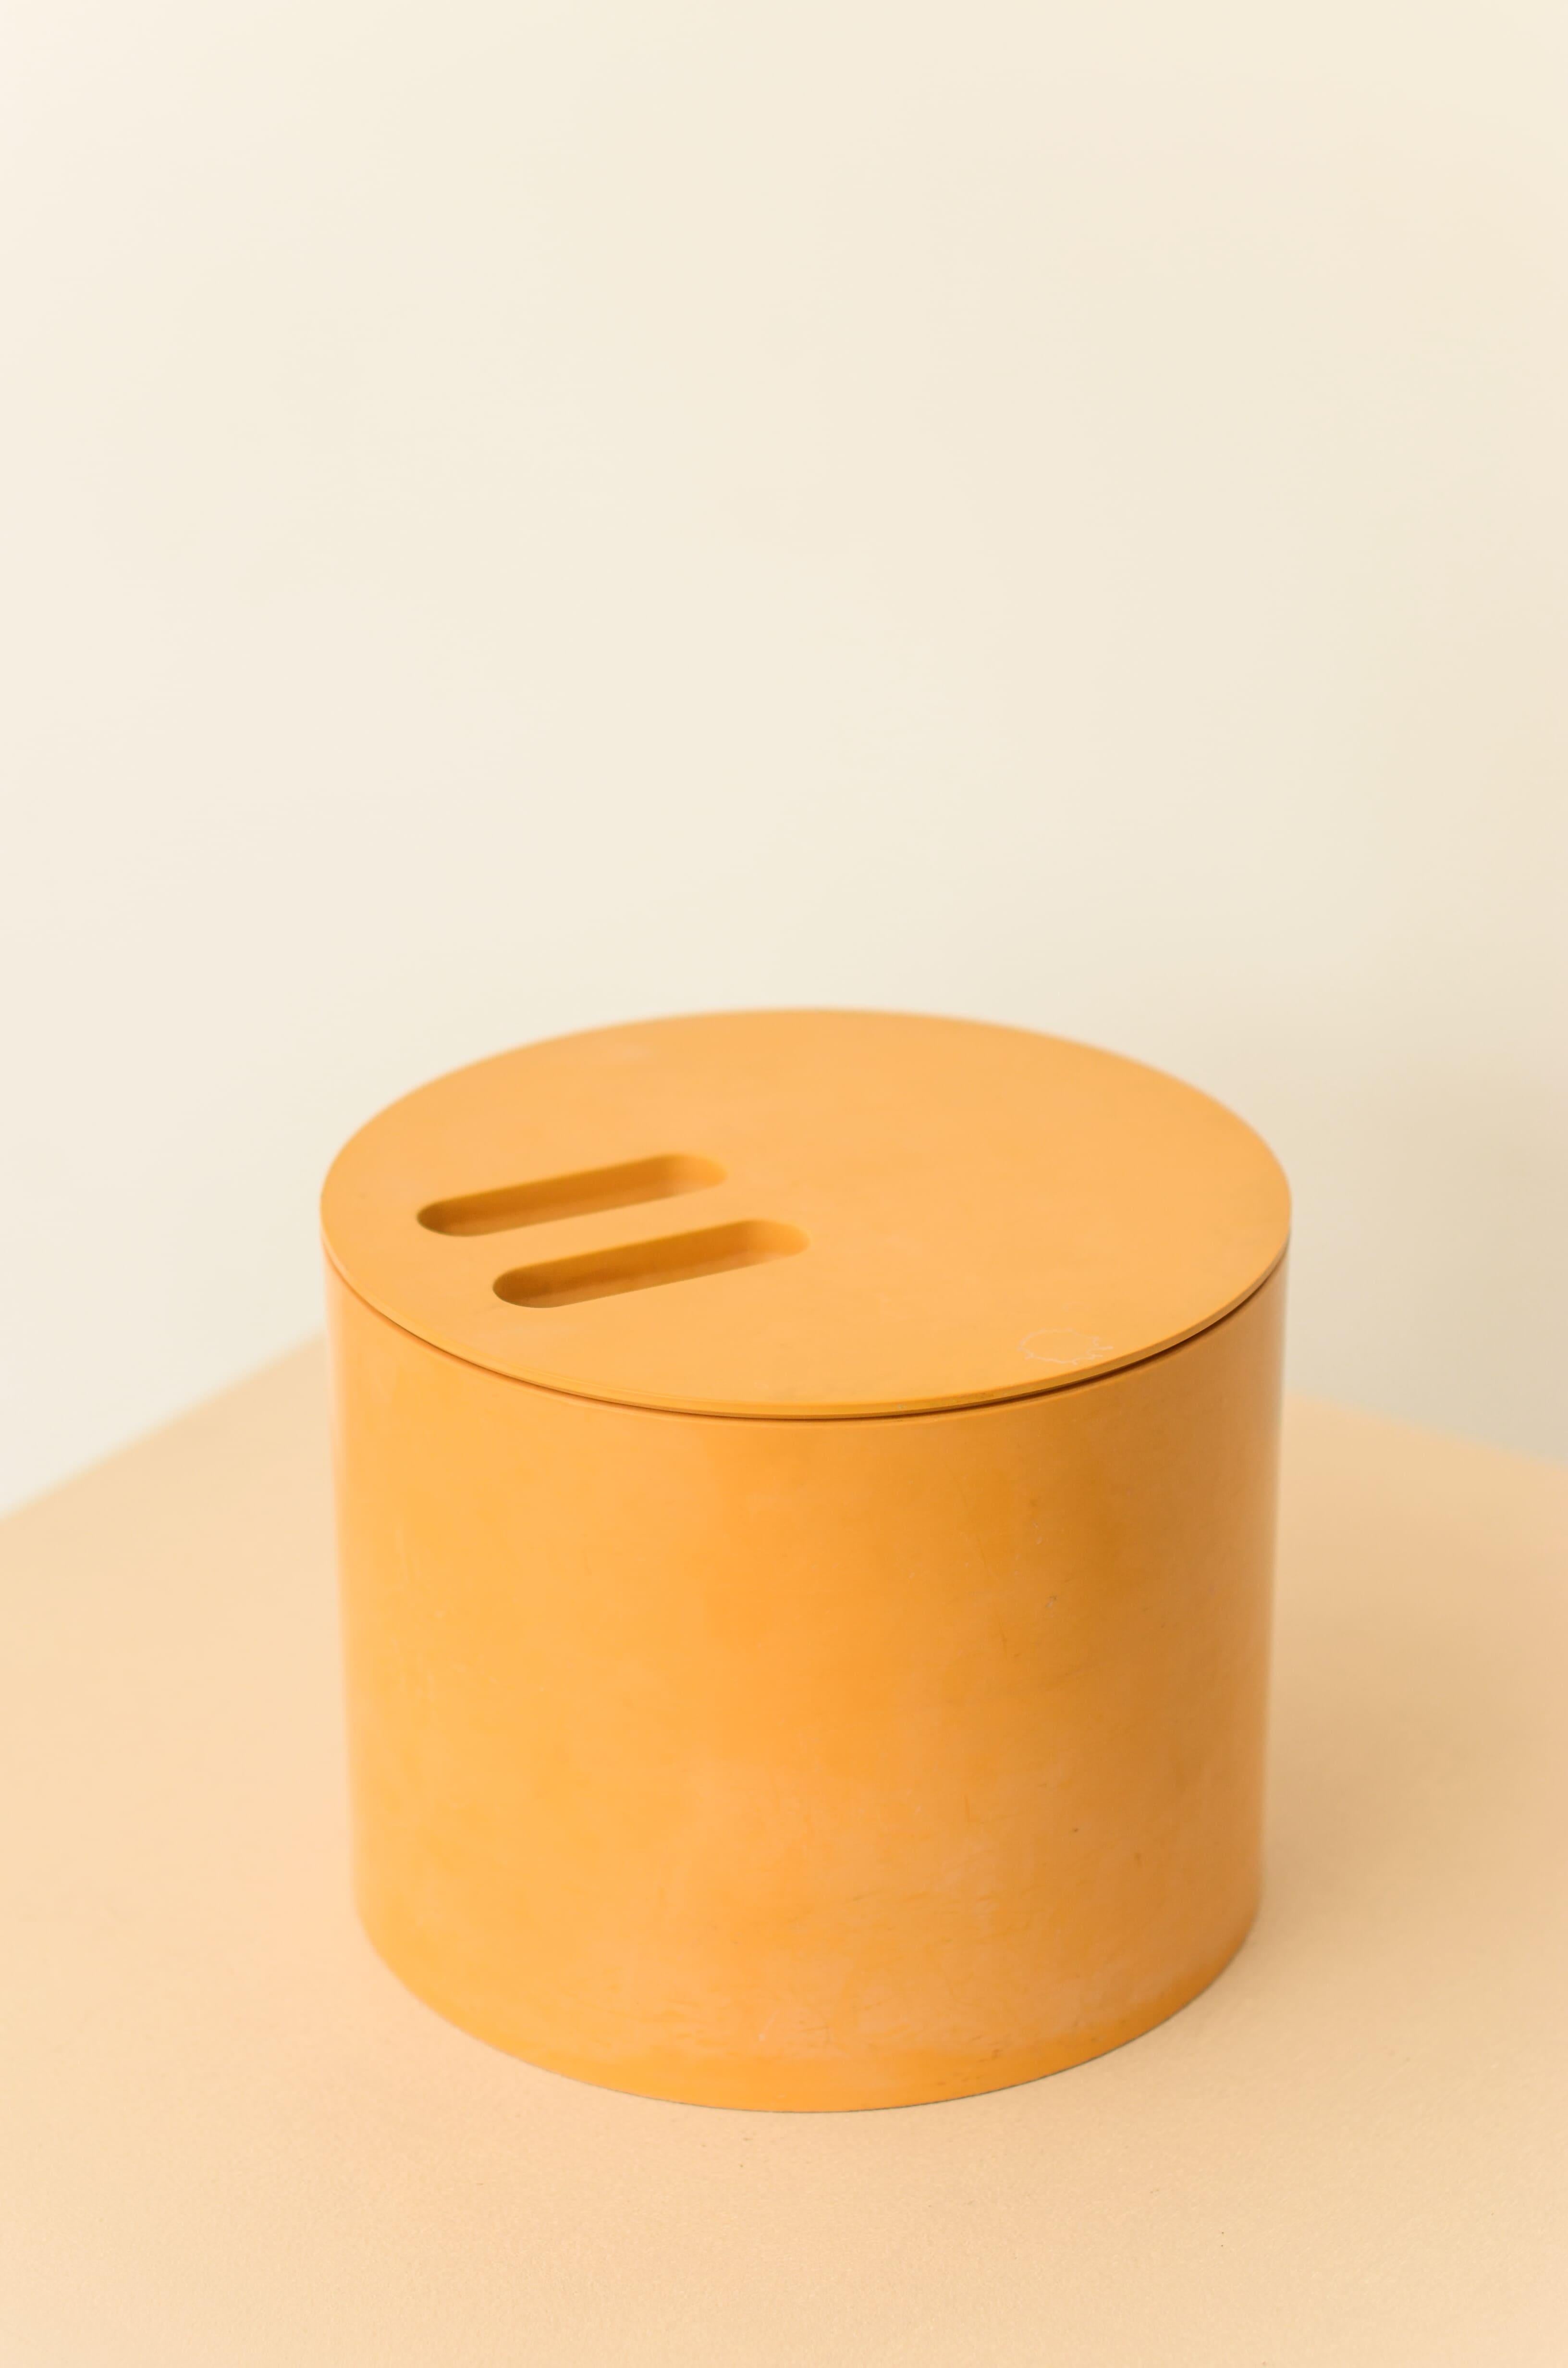 Ice bucket produced by the plastic factory Hévea, which launched a line of utility products called Eva in the 1970s designed by architects Jorge Zalszupin, Paulo Jorge Pedreira and Oswaldo Mellone. Does not include the tweezers.